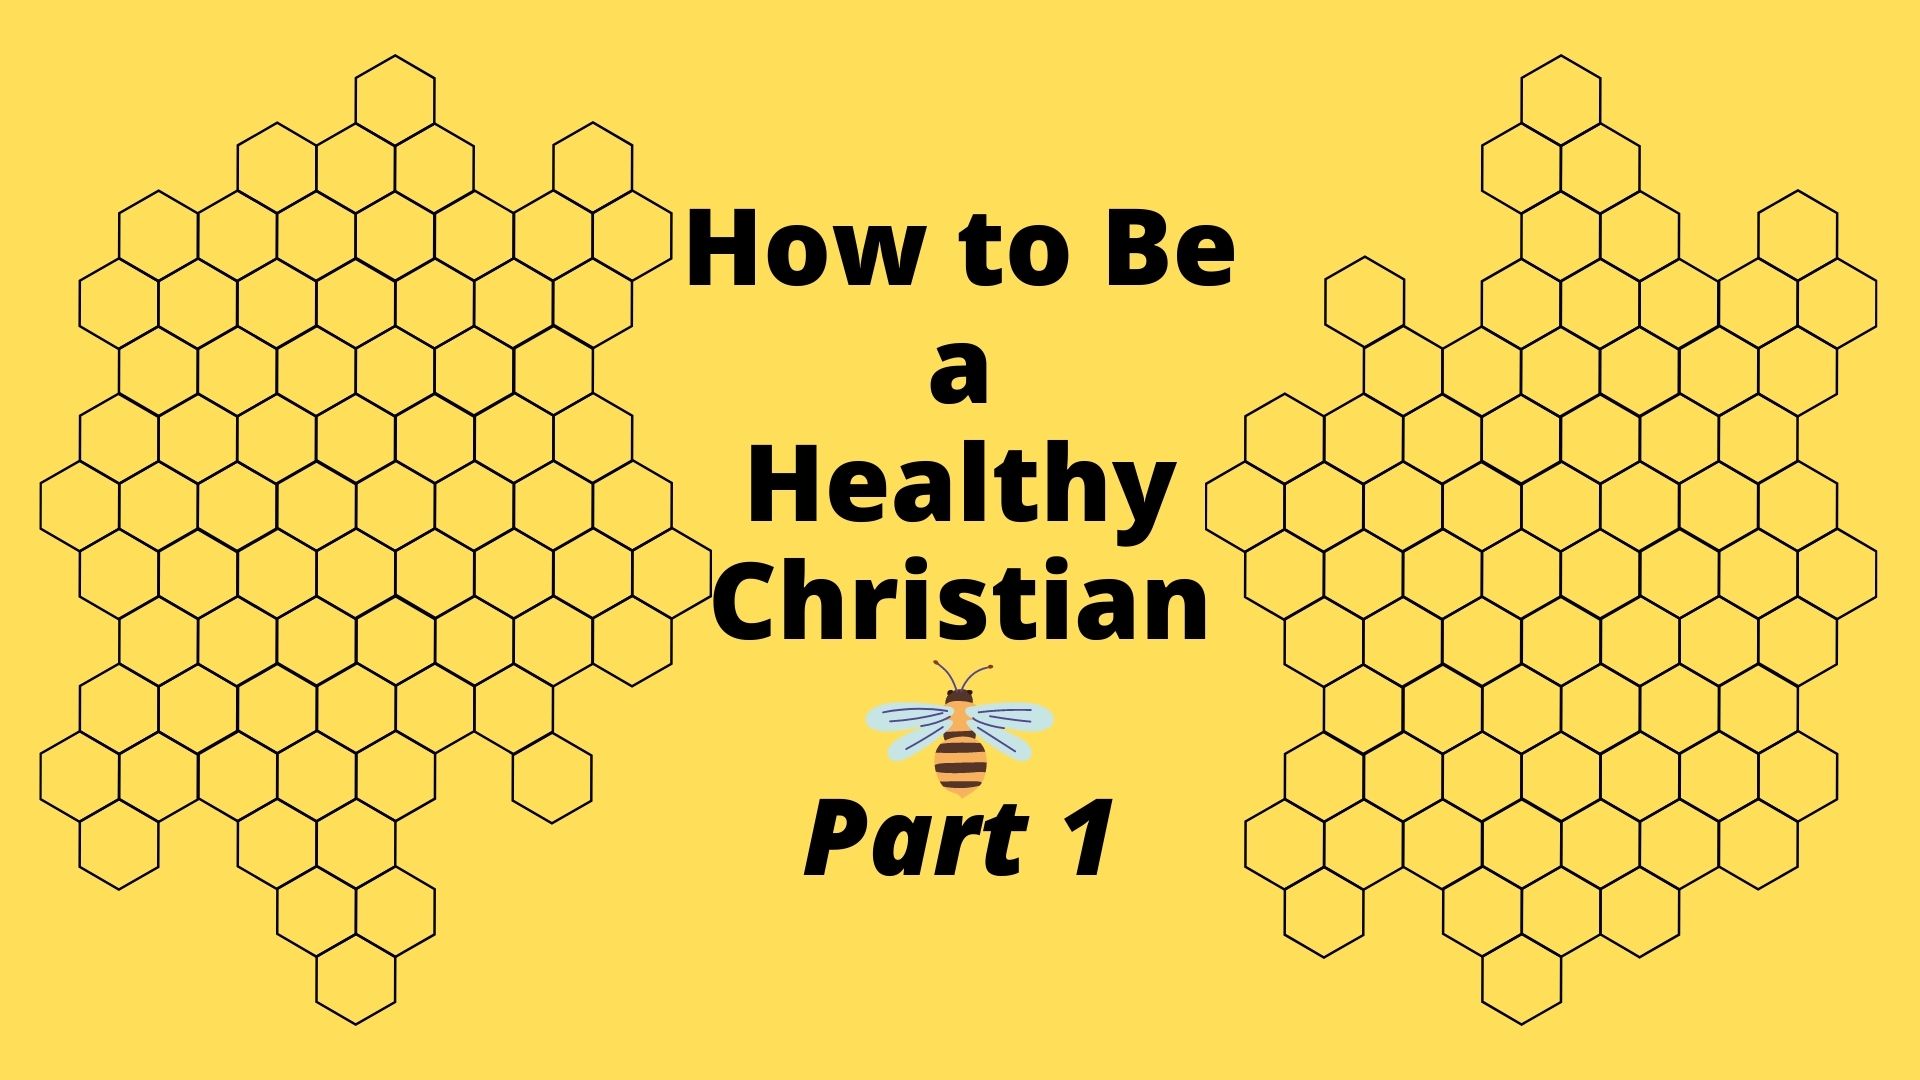 How to Be a Healthy Christian: Part 1 (John 3:16) Image